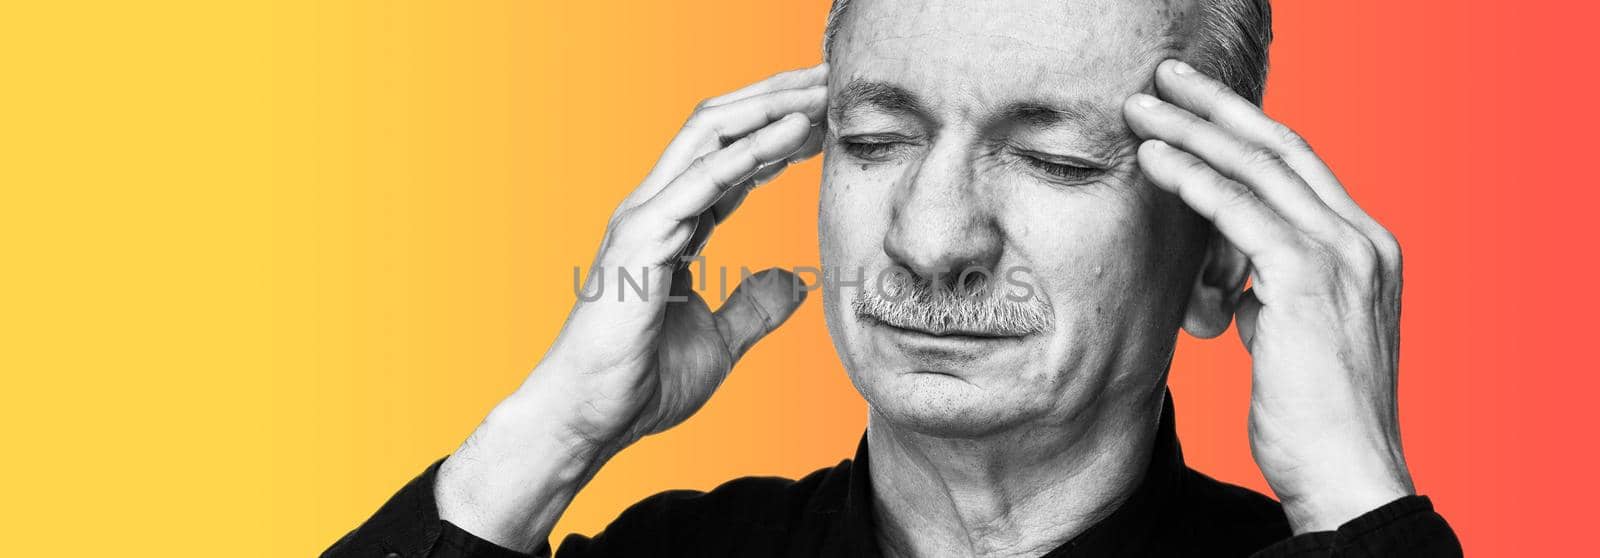 Strong headache. Old man touches his head with his hands and feeling tired and headache. Health care concept. BW image of old man suffering from a headache isolated on background with copy space.